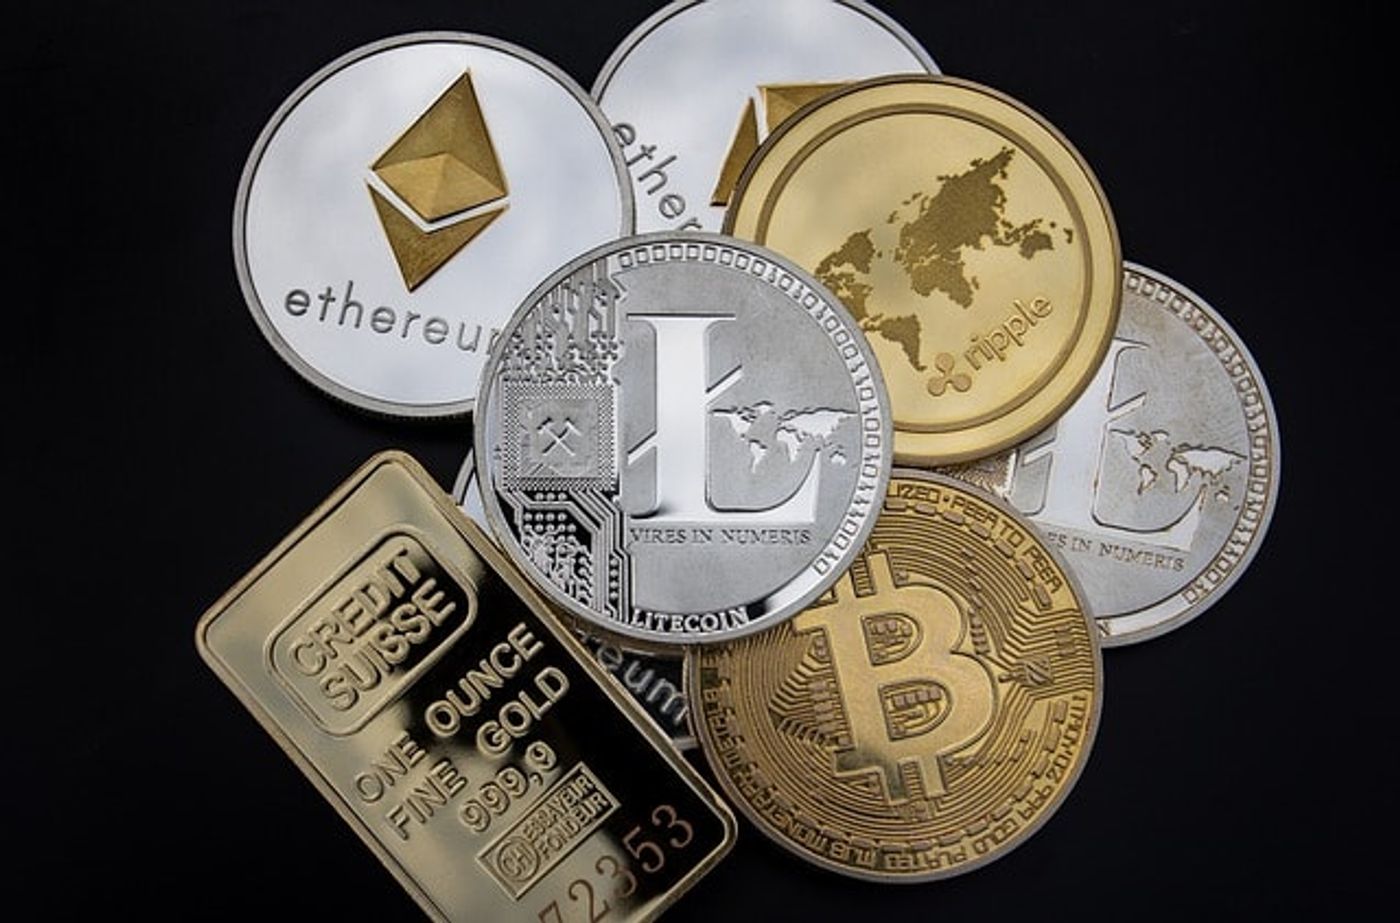 Eight crypto coins, in silver and gold colors, with different cryptocurrency logos such as Bitcoin and Ethereum, one on top of the other, unorderly